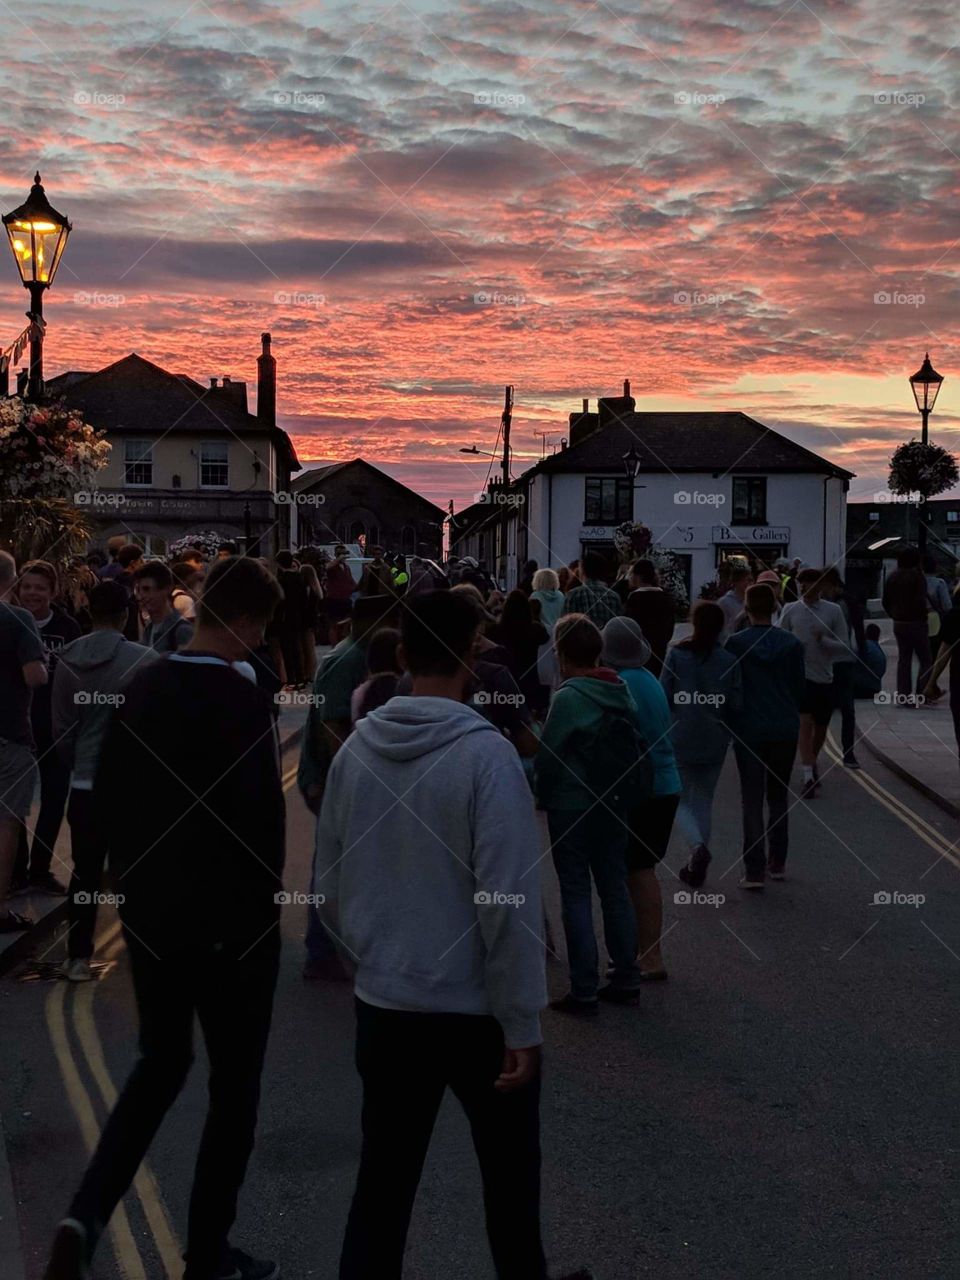 Sunset at Lafrowda festival in St Just. Amazing colours in the sky over a small village in Cornwall.